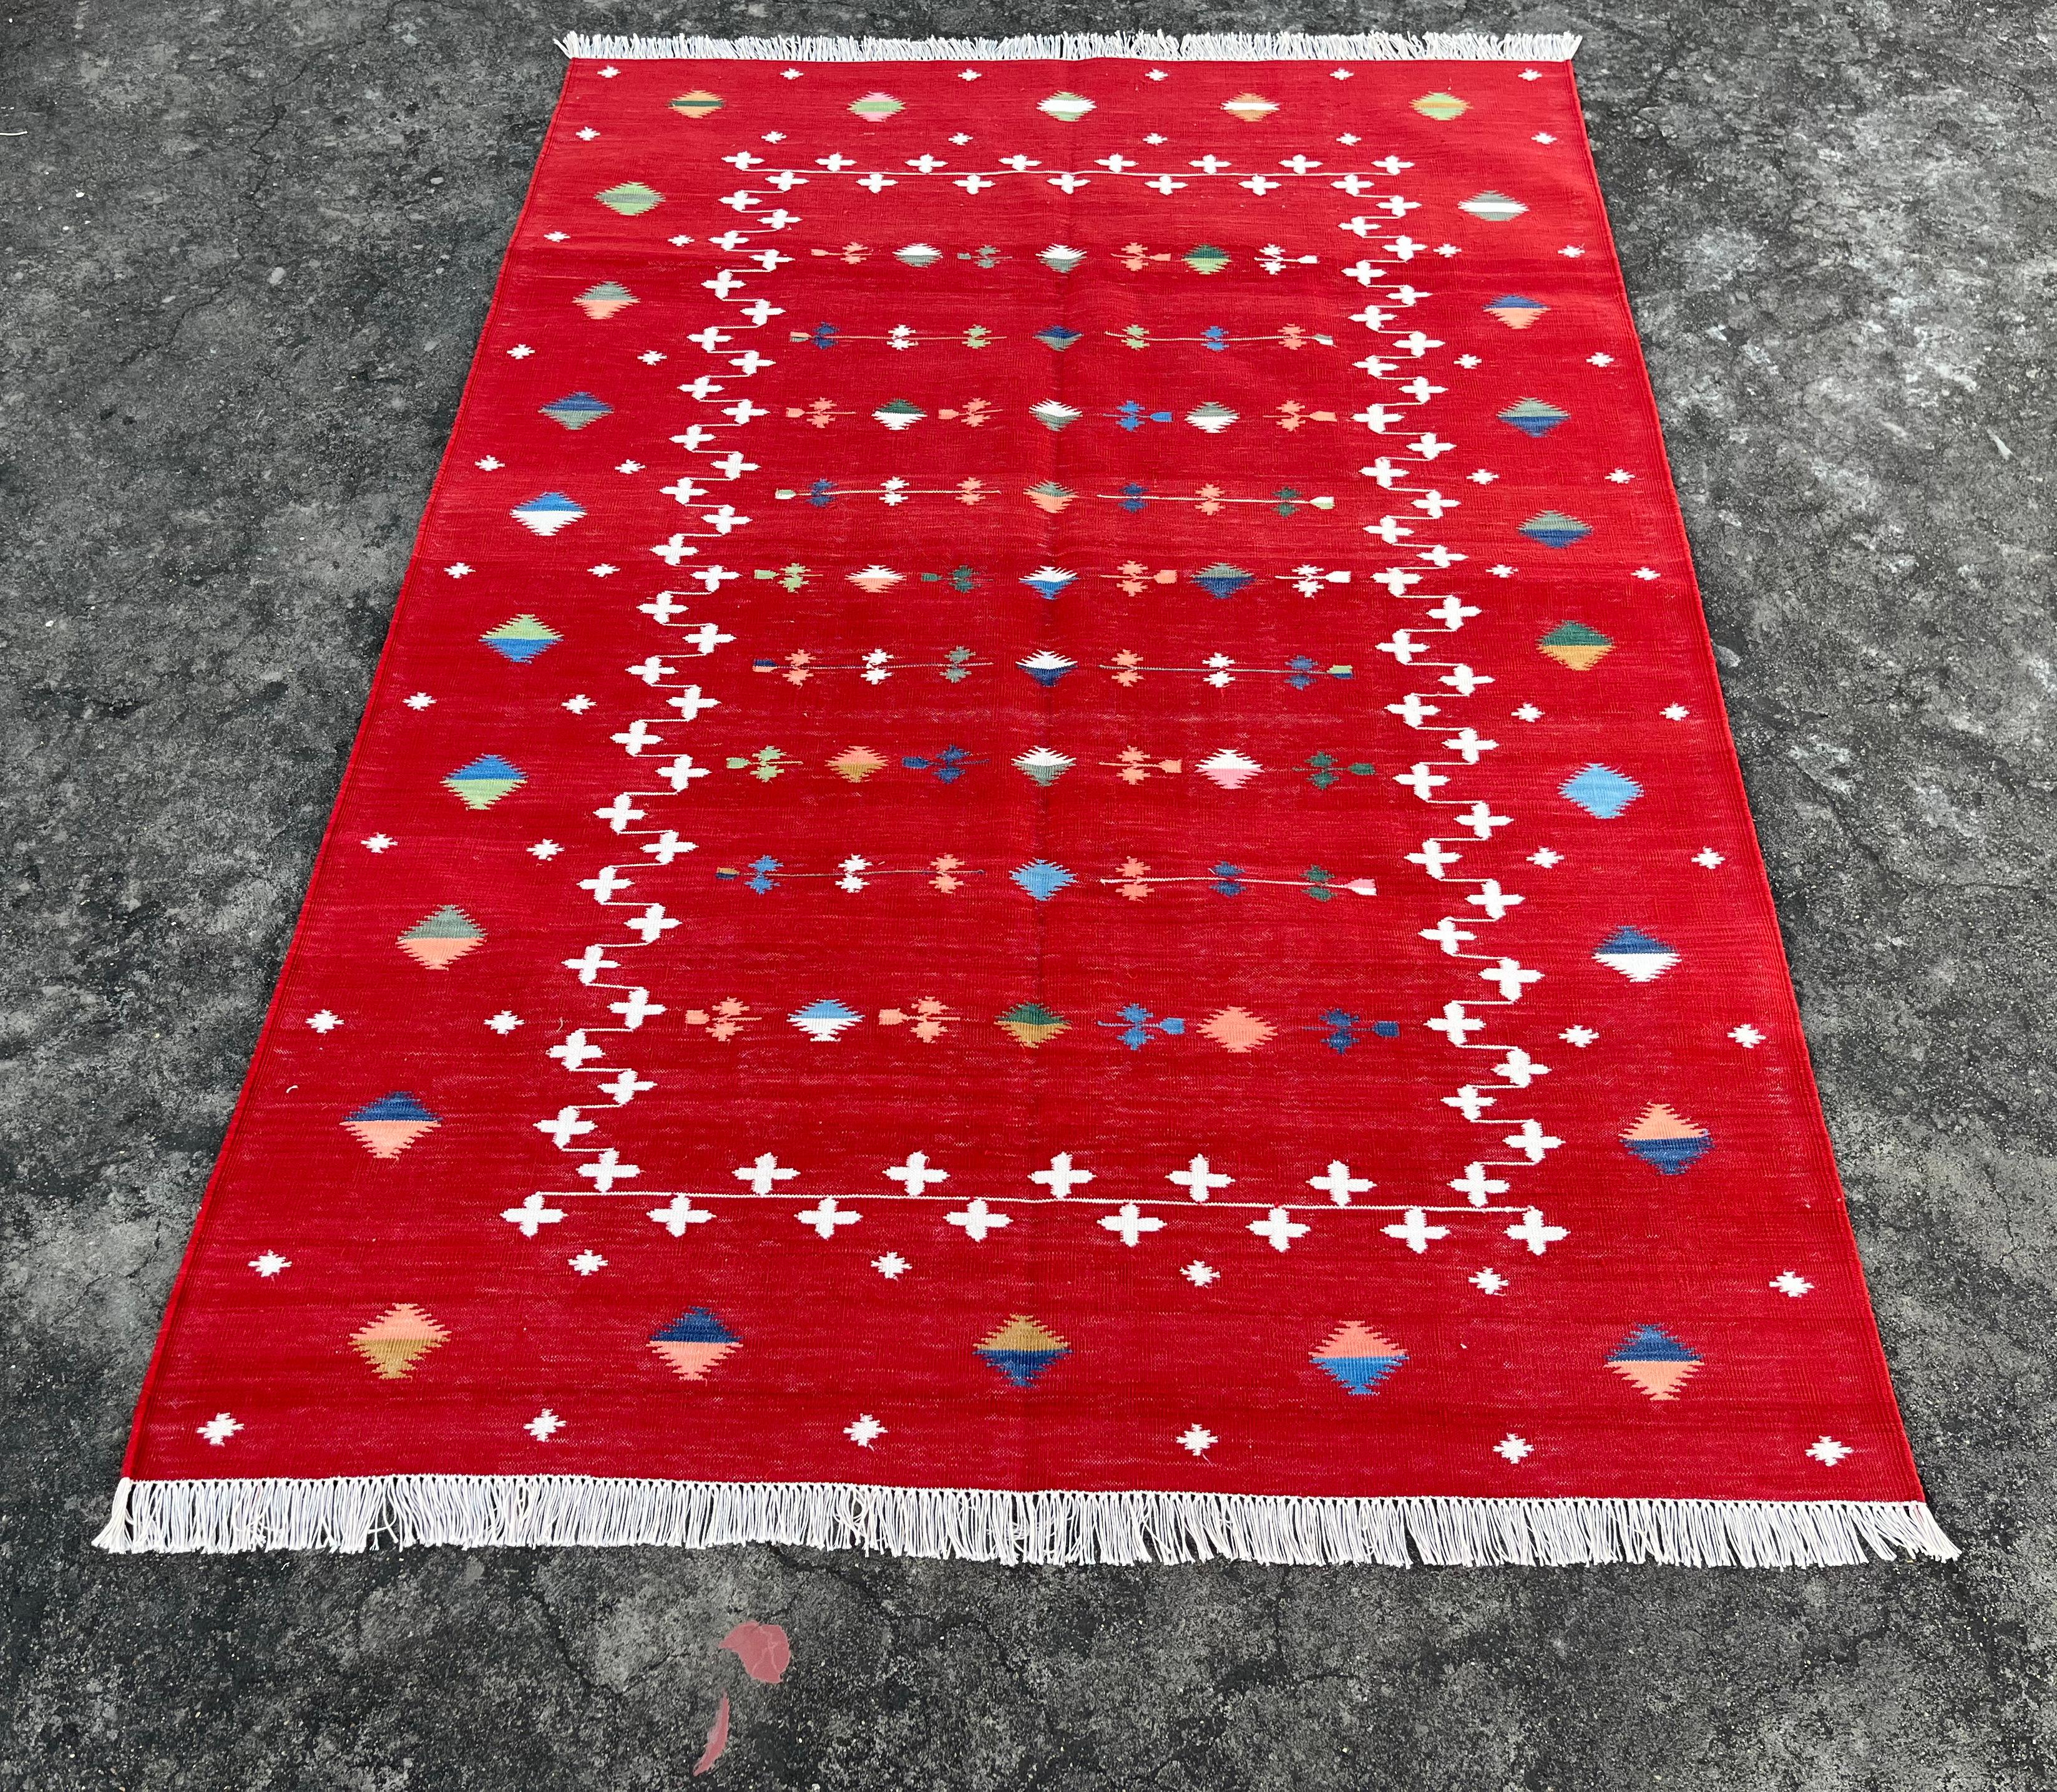 Handmade Cotton Area Flat Weave Rug, 4x6 Red And White Shooting Star Dhurrie Rug In New Condition For Sale In Jaipur, IN